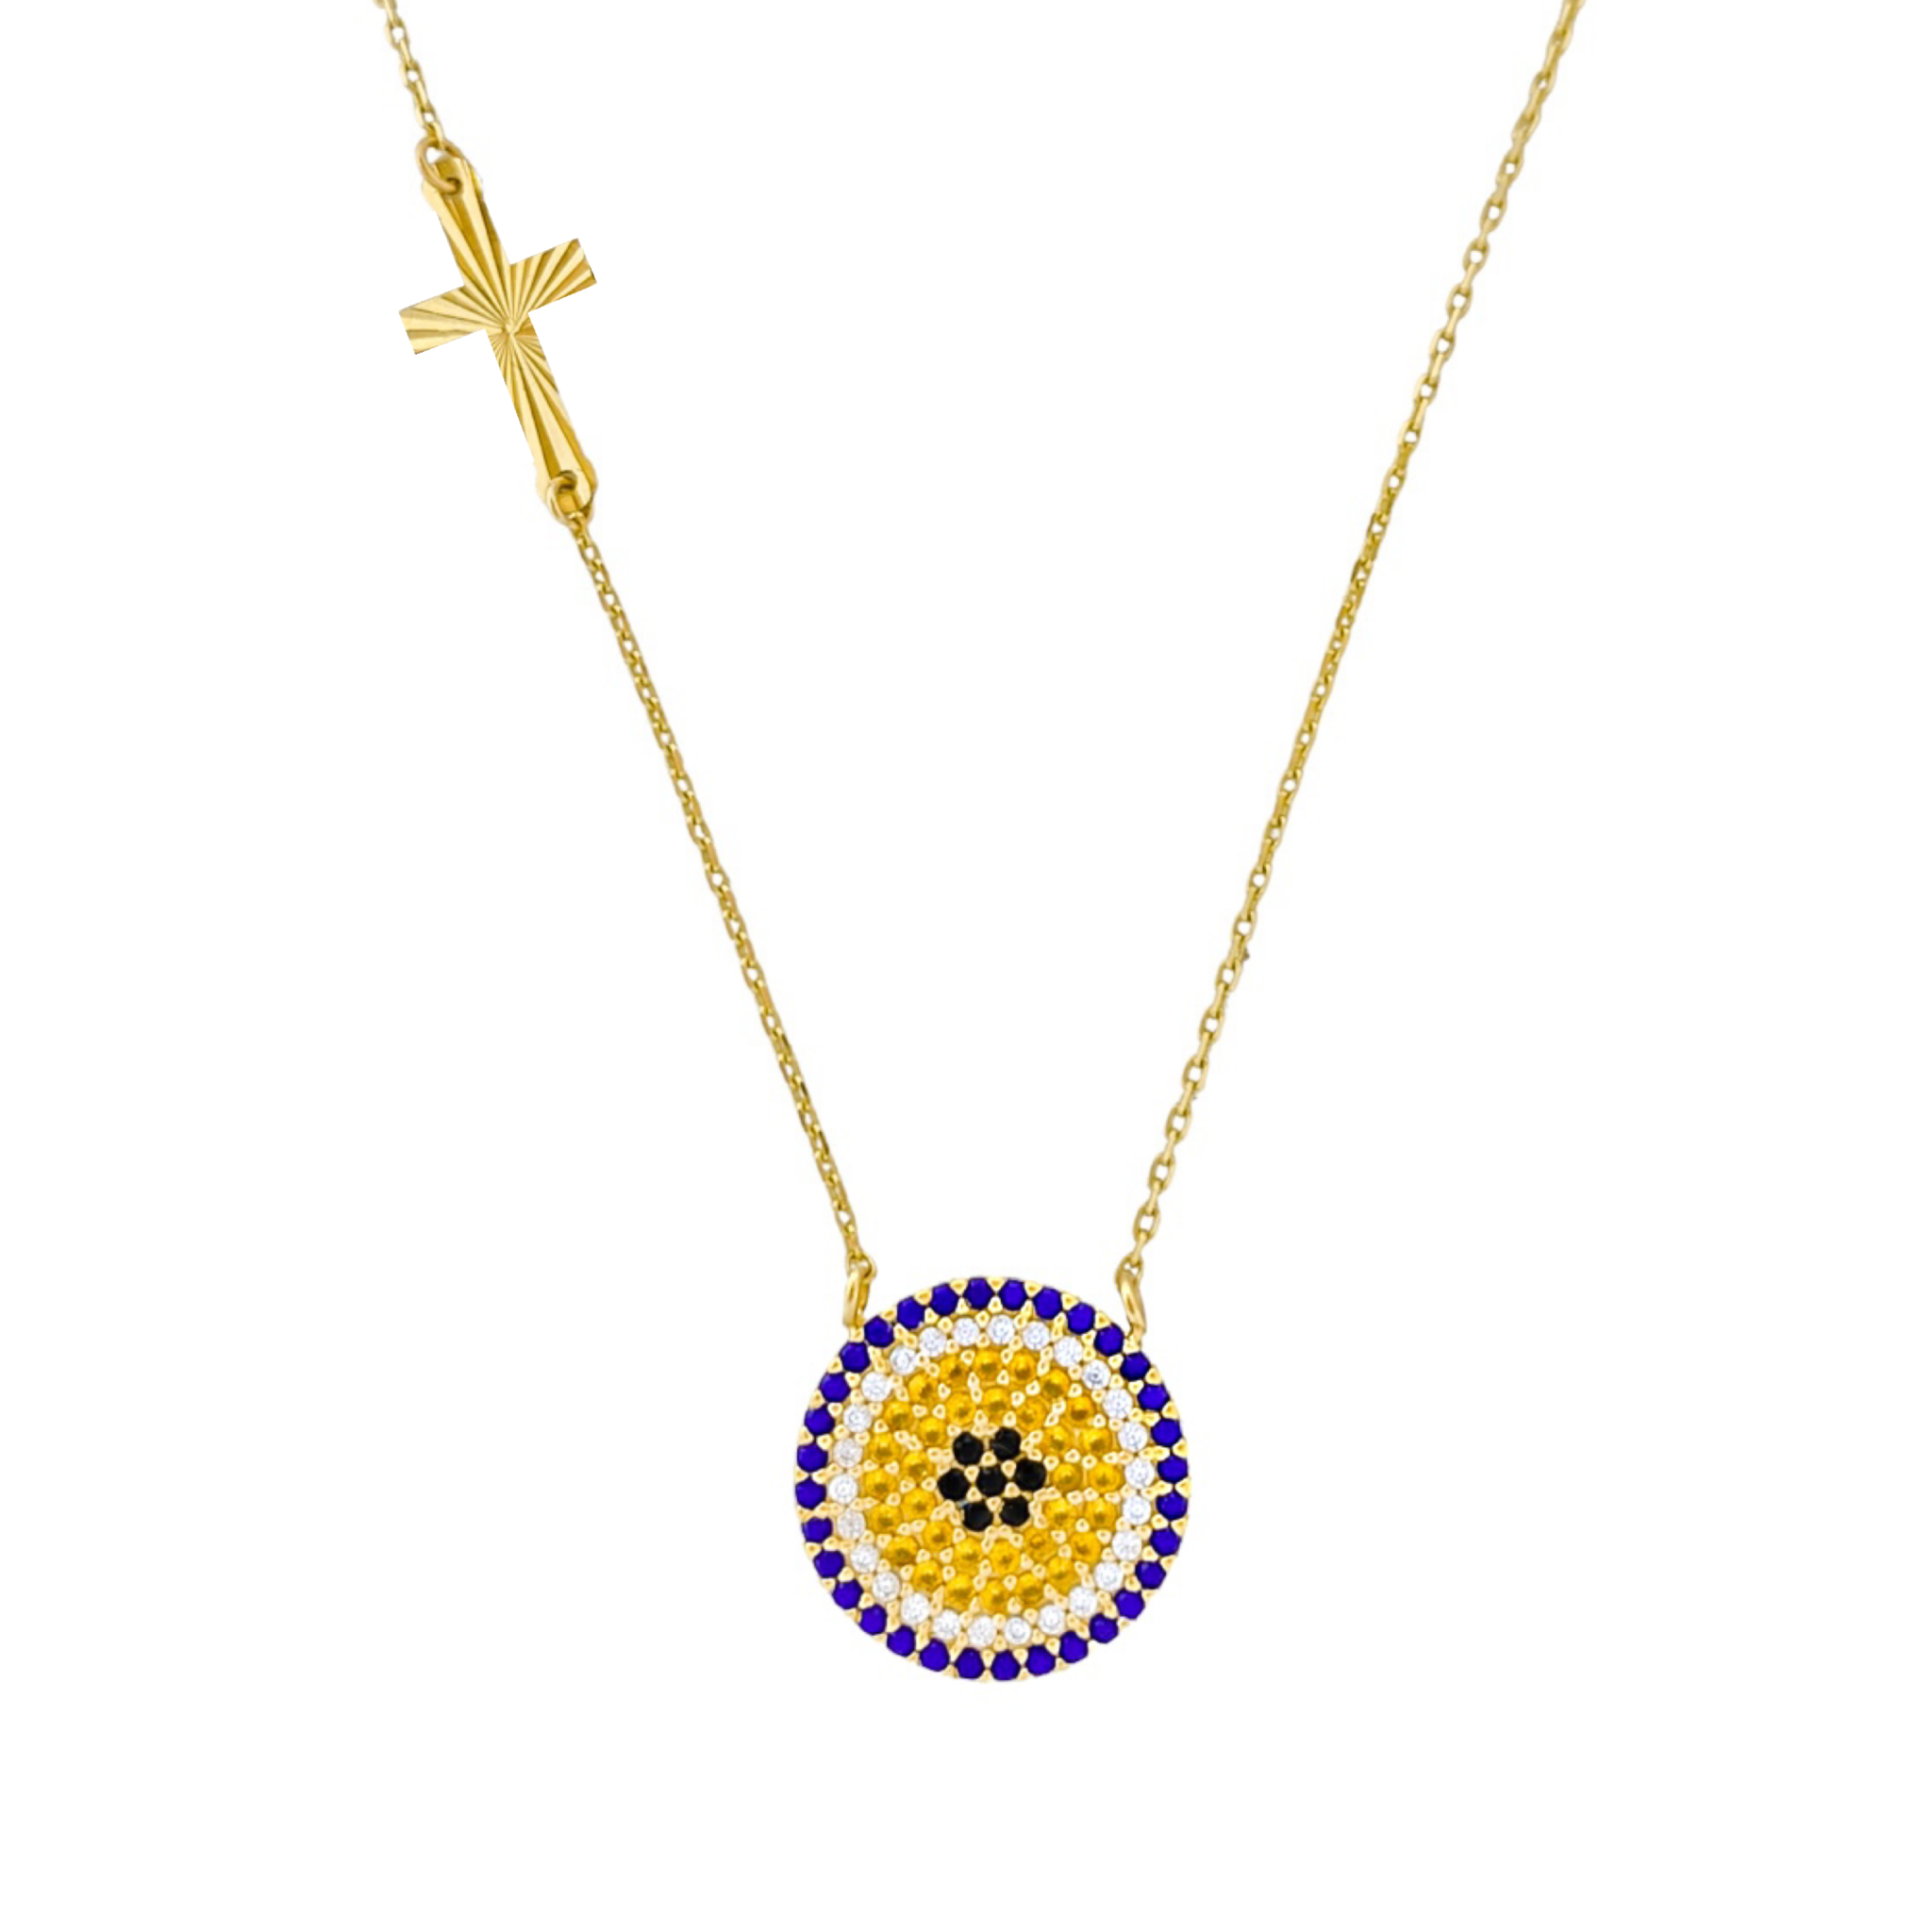 14K YELLOW GOLD FLOATING CROSS & EVIL EYE NECKLACE